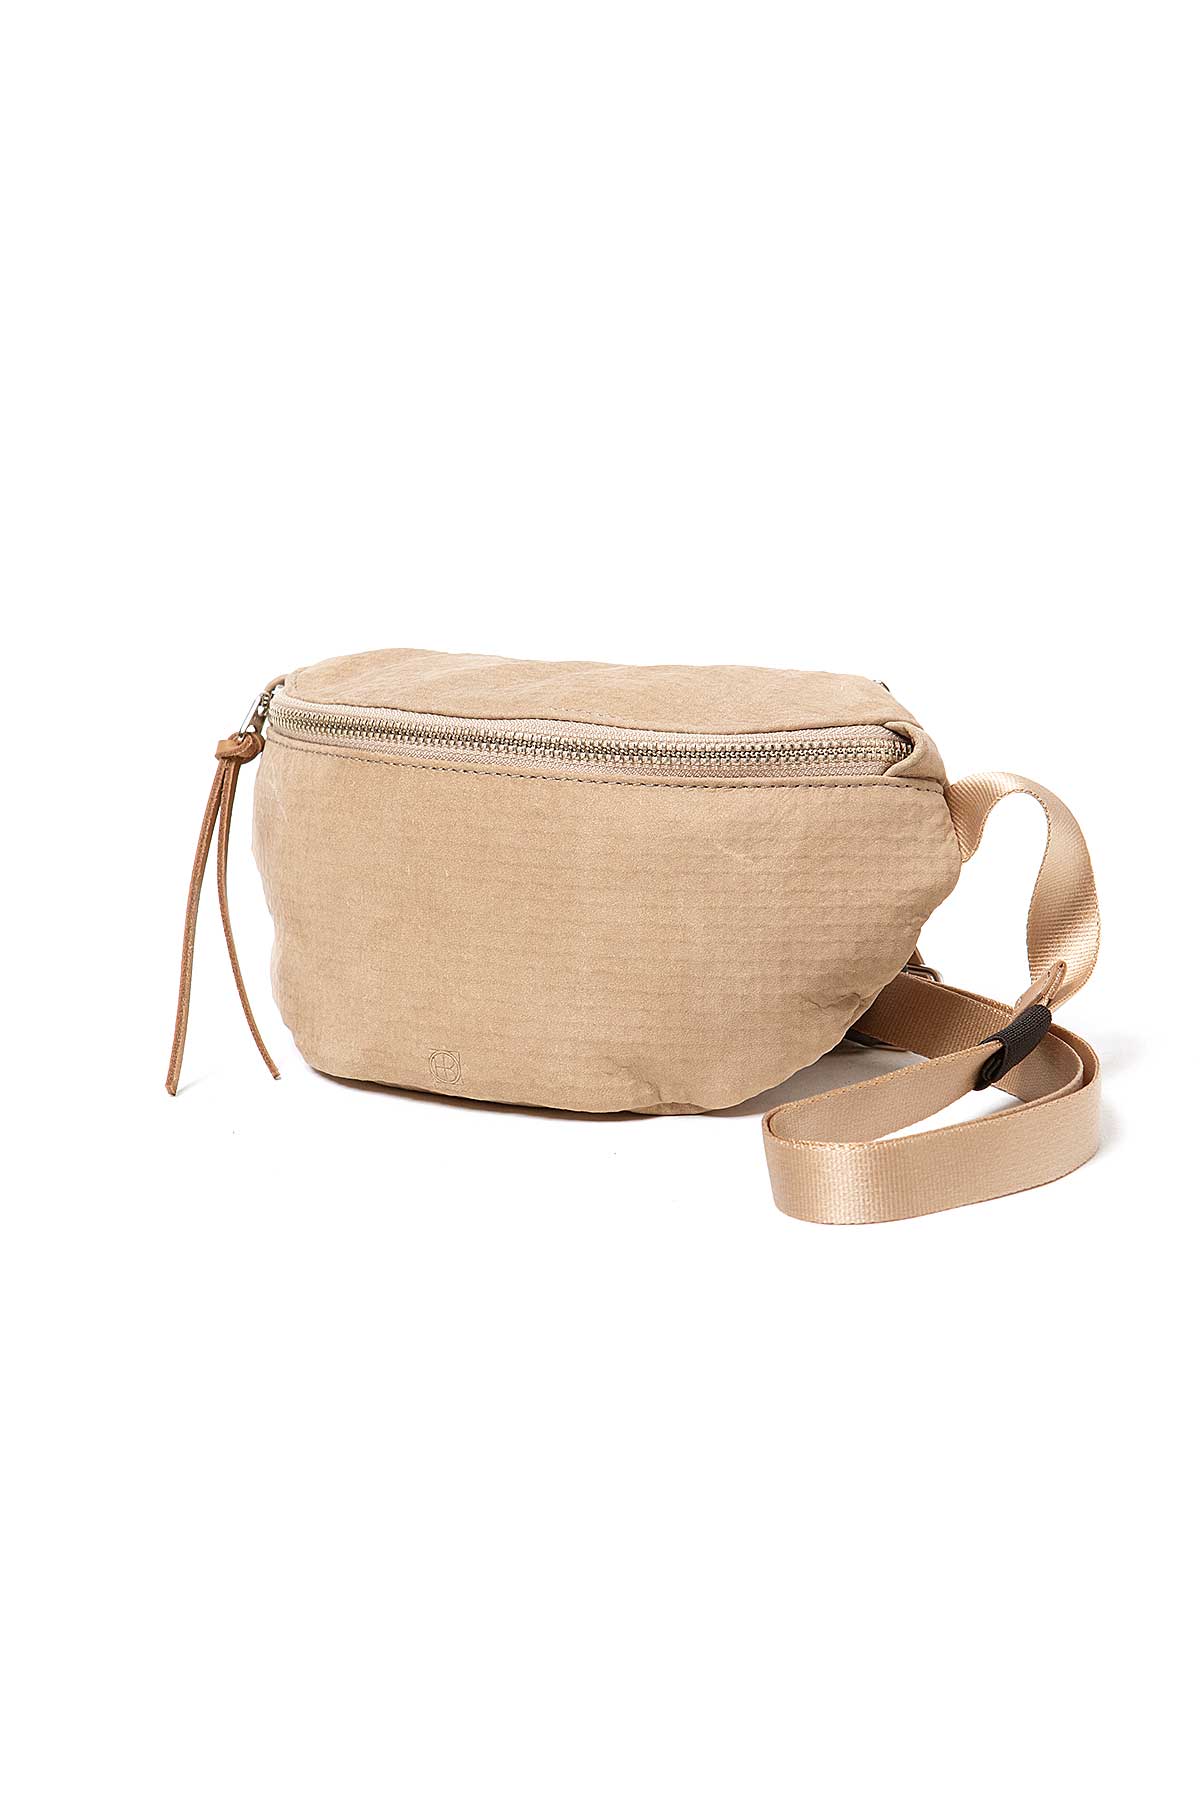 EVERYDAY WAIST POUCH with ECCO LEATHER | hobo